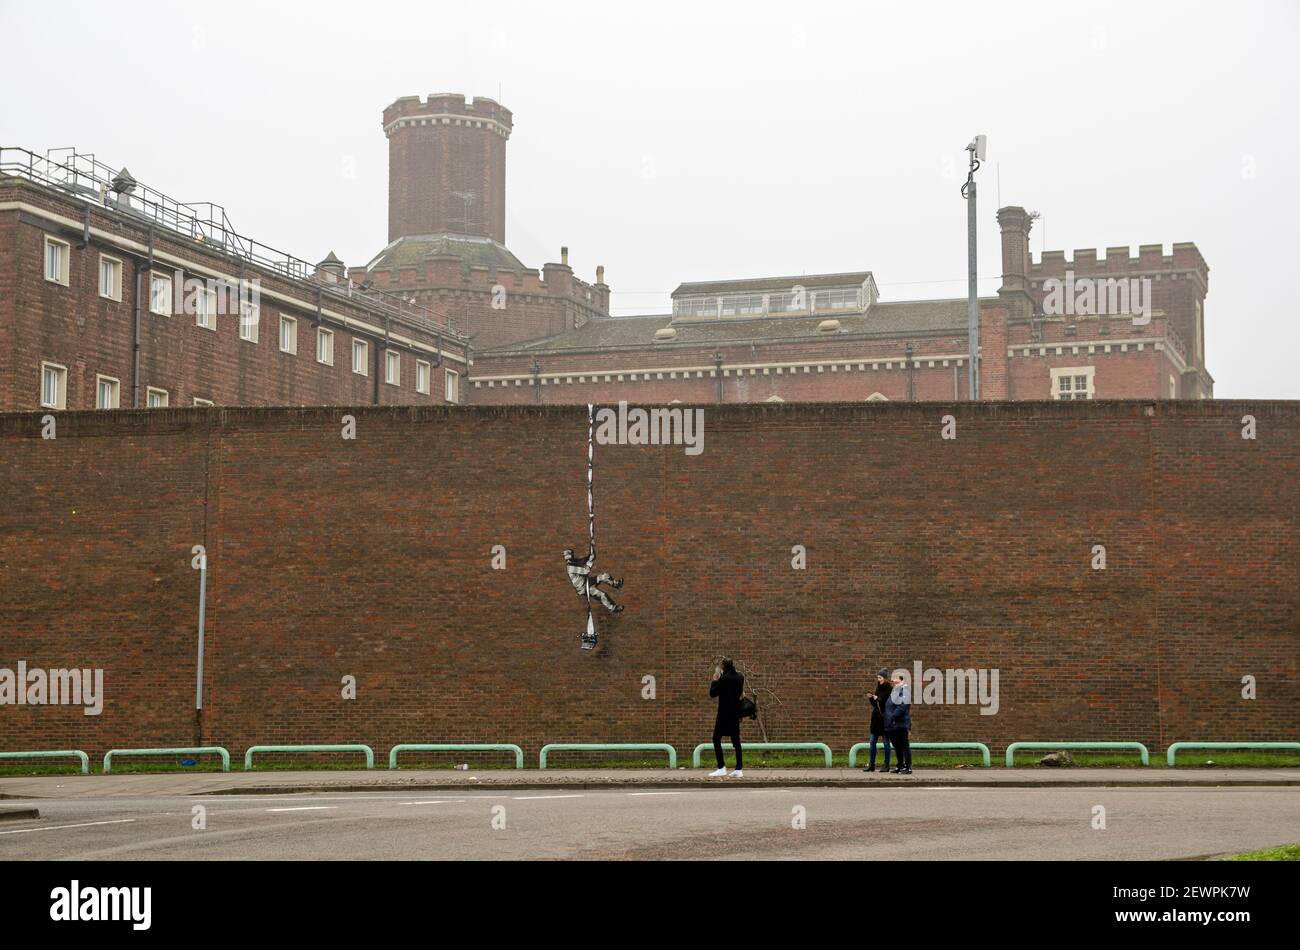 Reading, UK - March 3, 2021:  Local people admiring the graffiti art work Create Escape by Banksy showing a prisoner escaping from Reading Gaol. Stock Photo